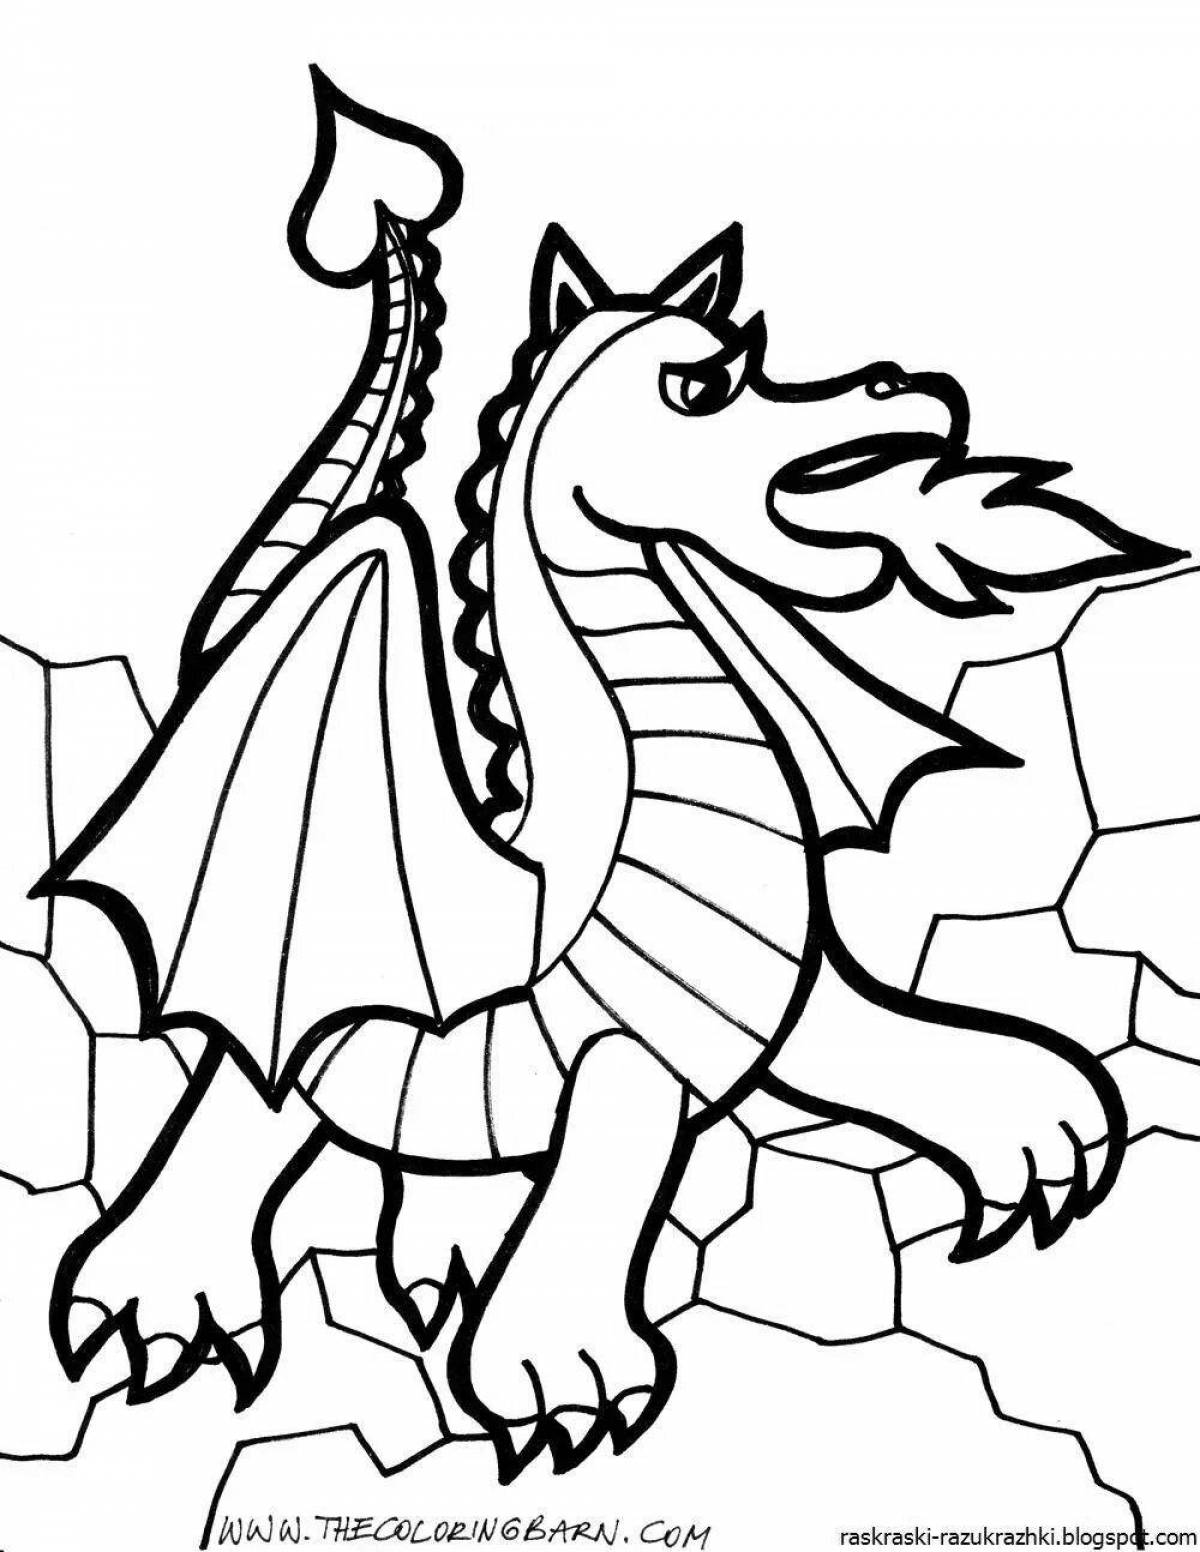 Coloring dragons for children 6-7 years old